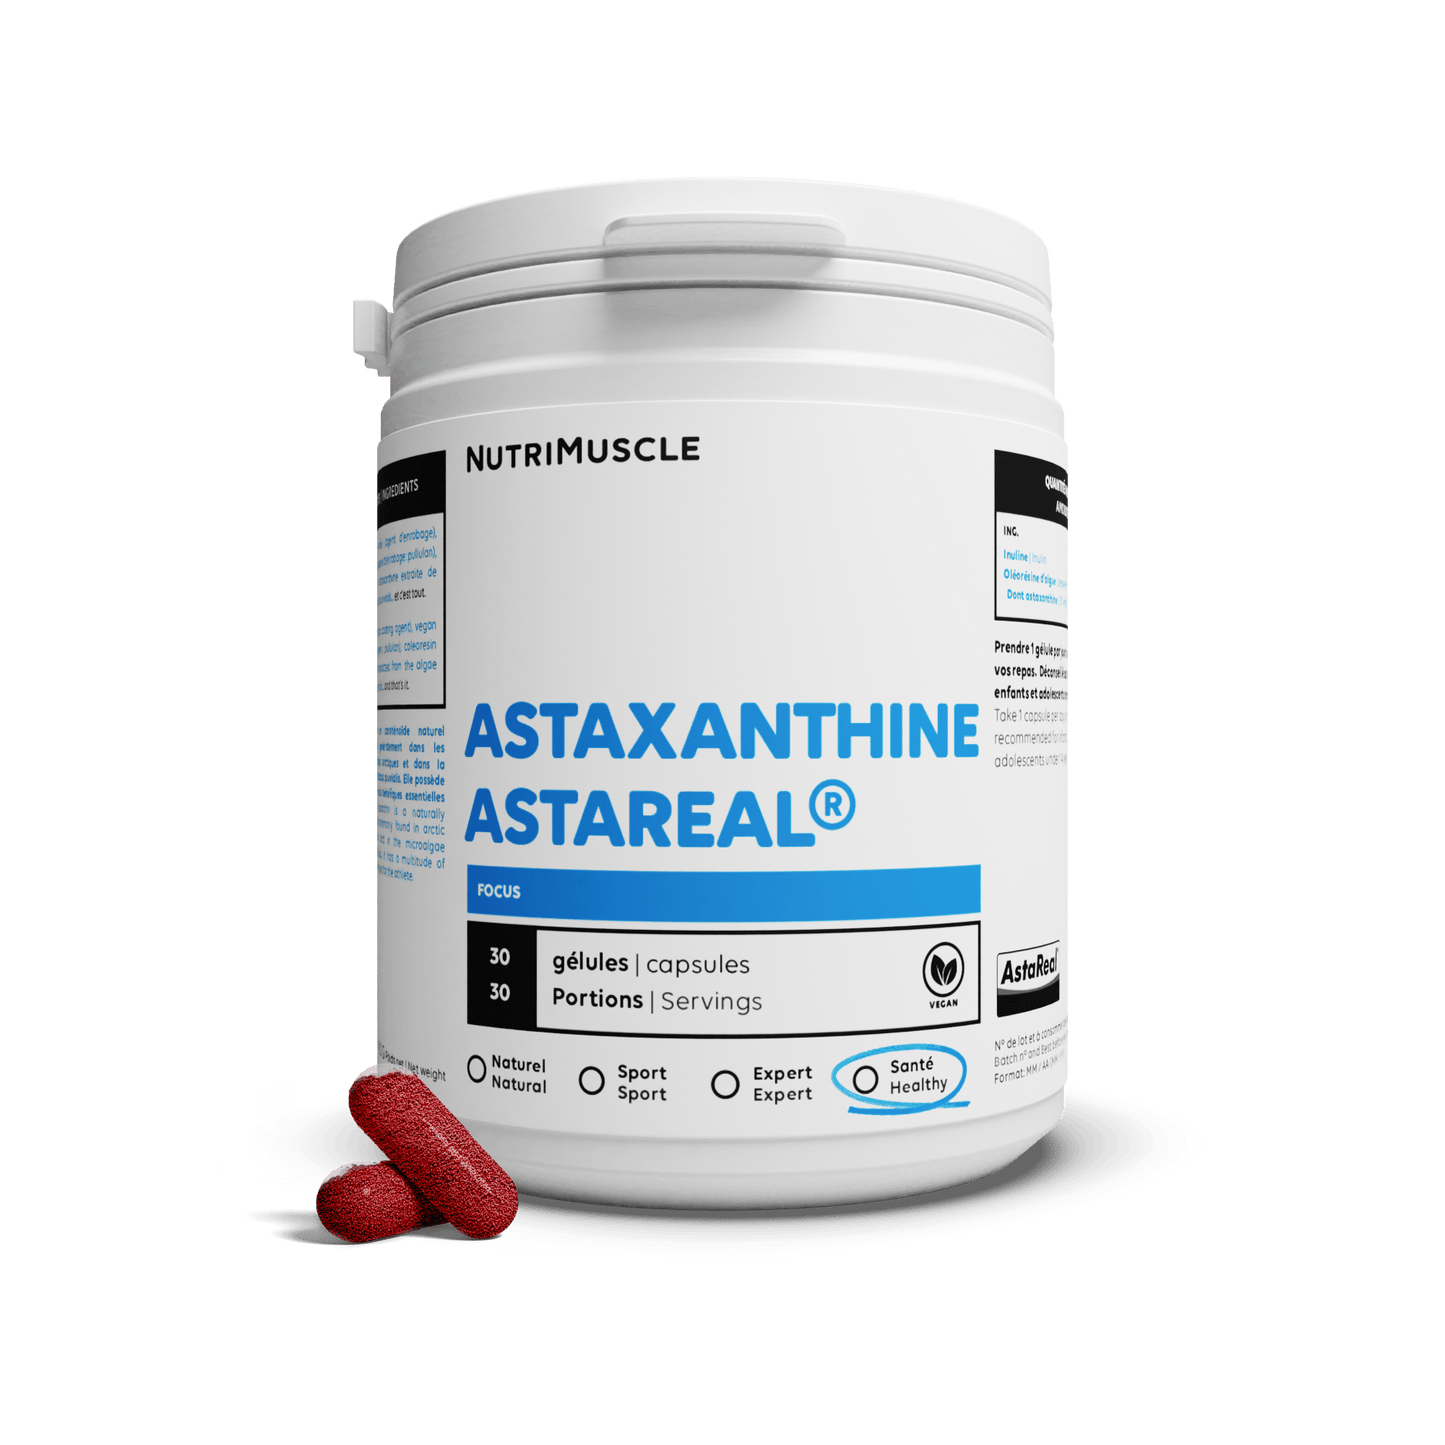 Nutrimuscle Nutriments Astaxanthine Astareal®